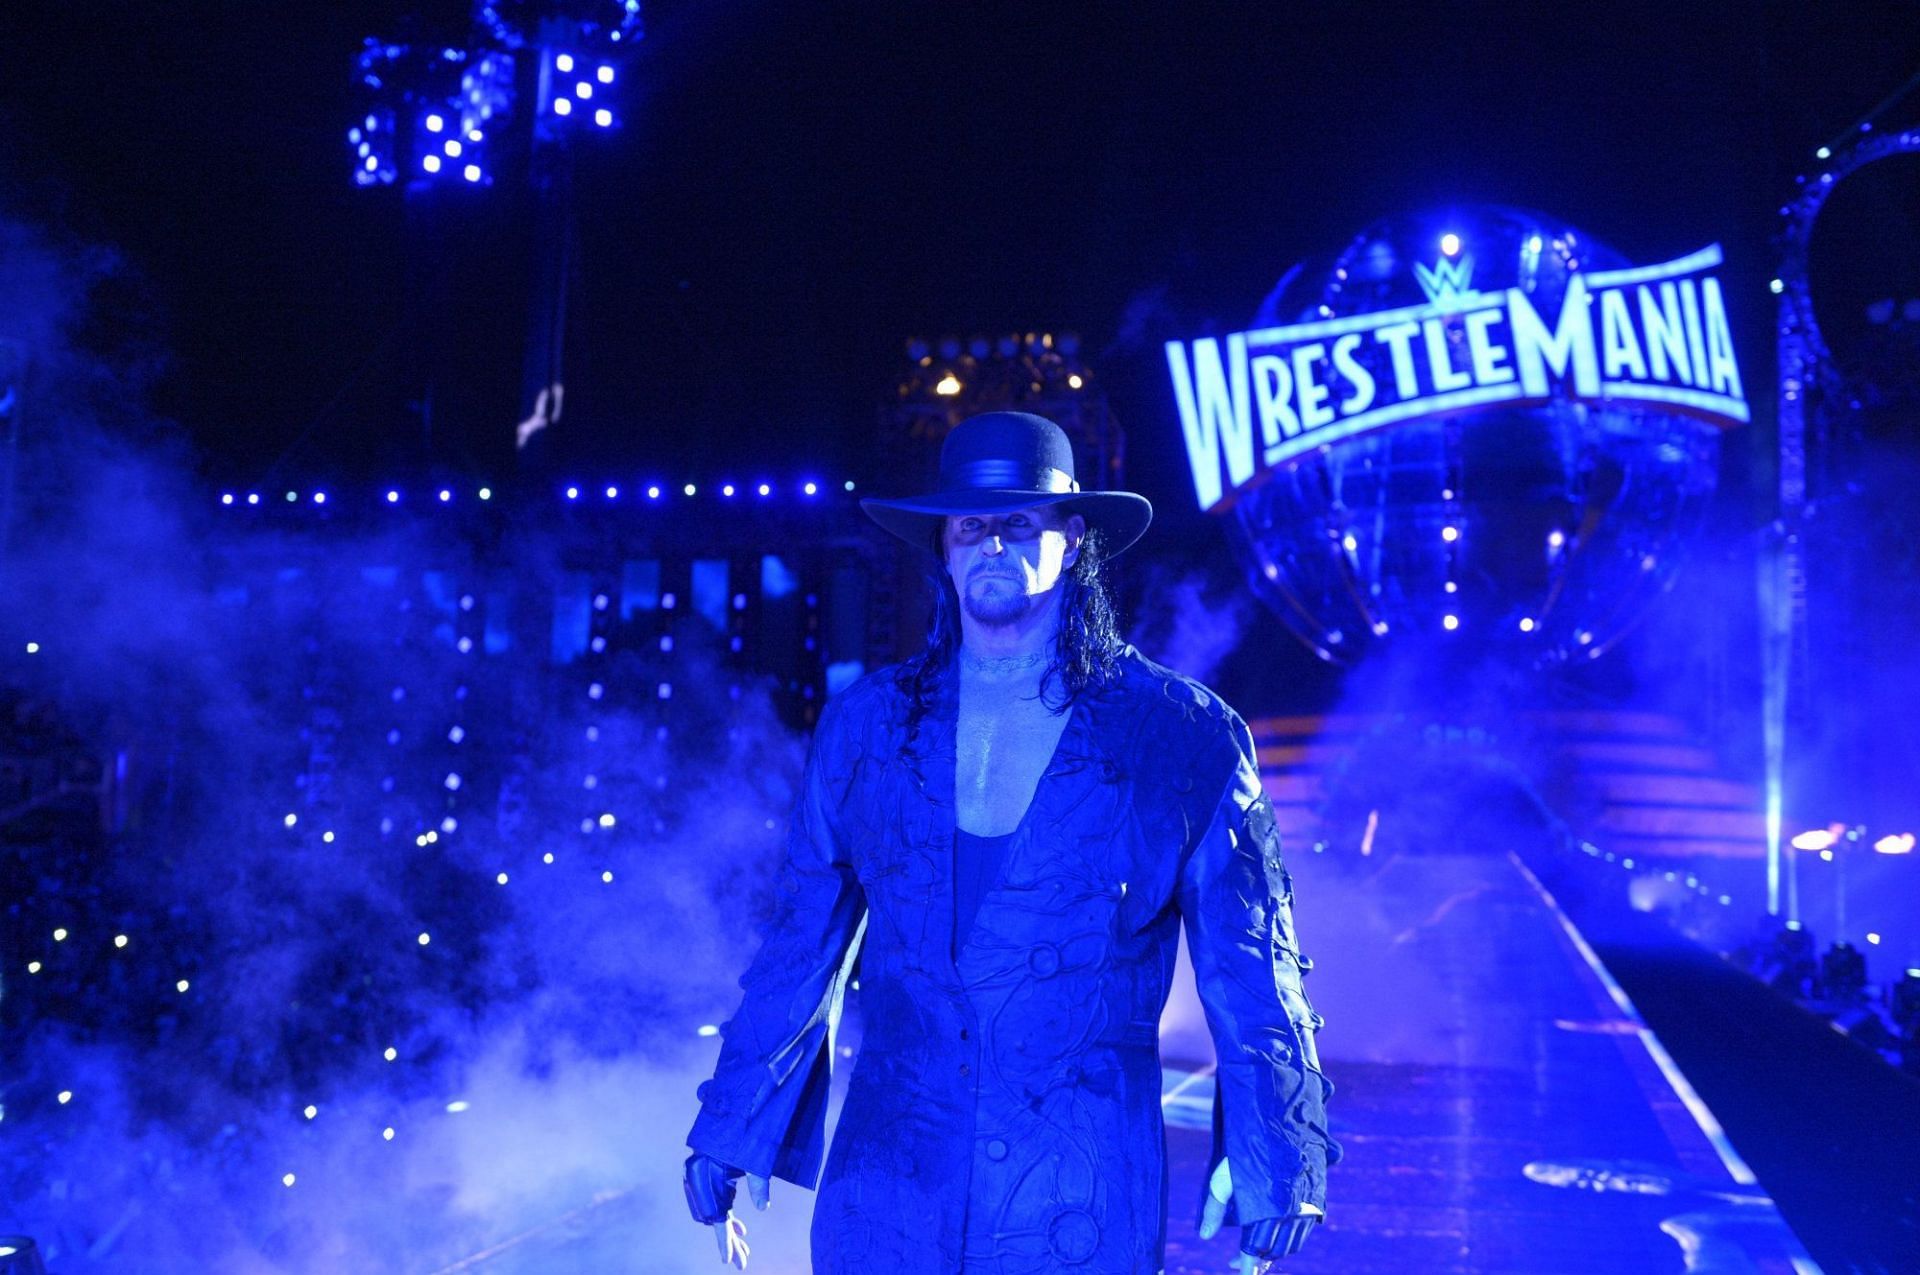 The Undertaker is synonymous with greatness at WrestleMania.